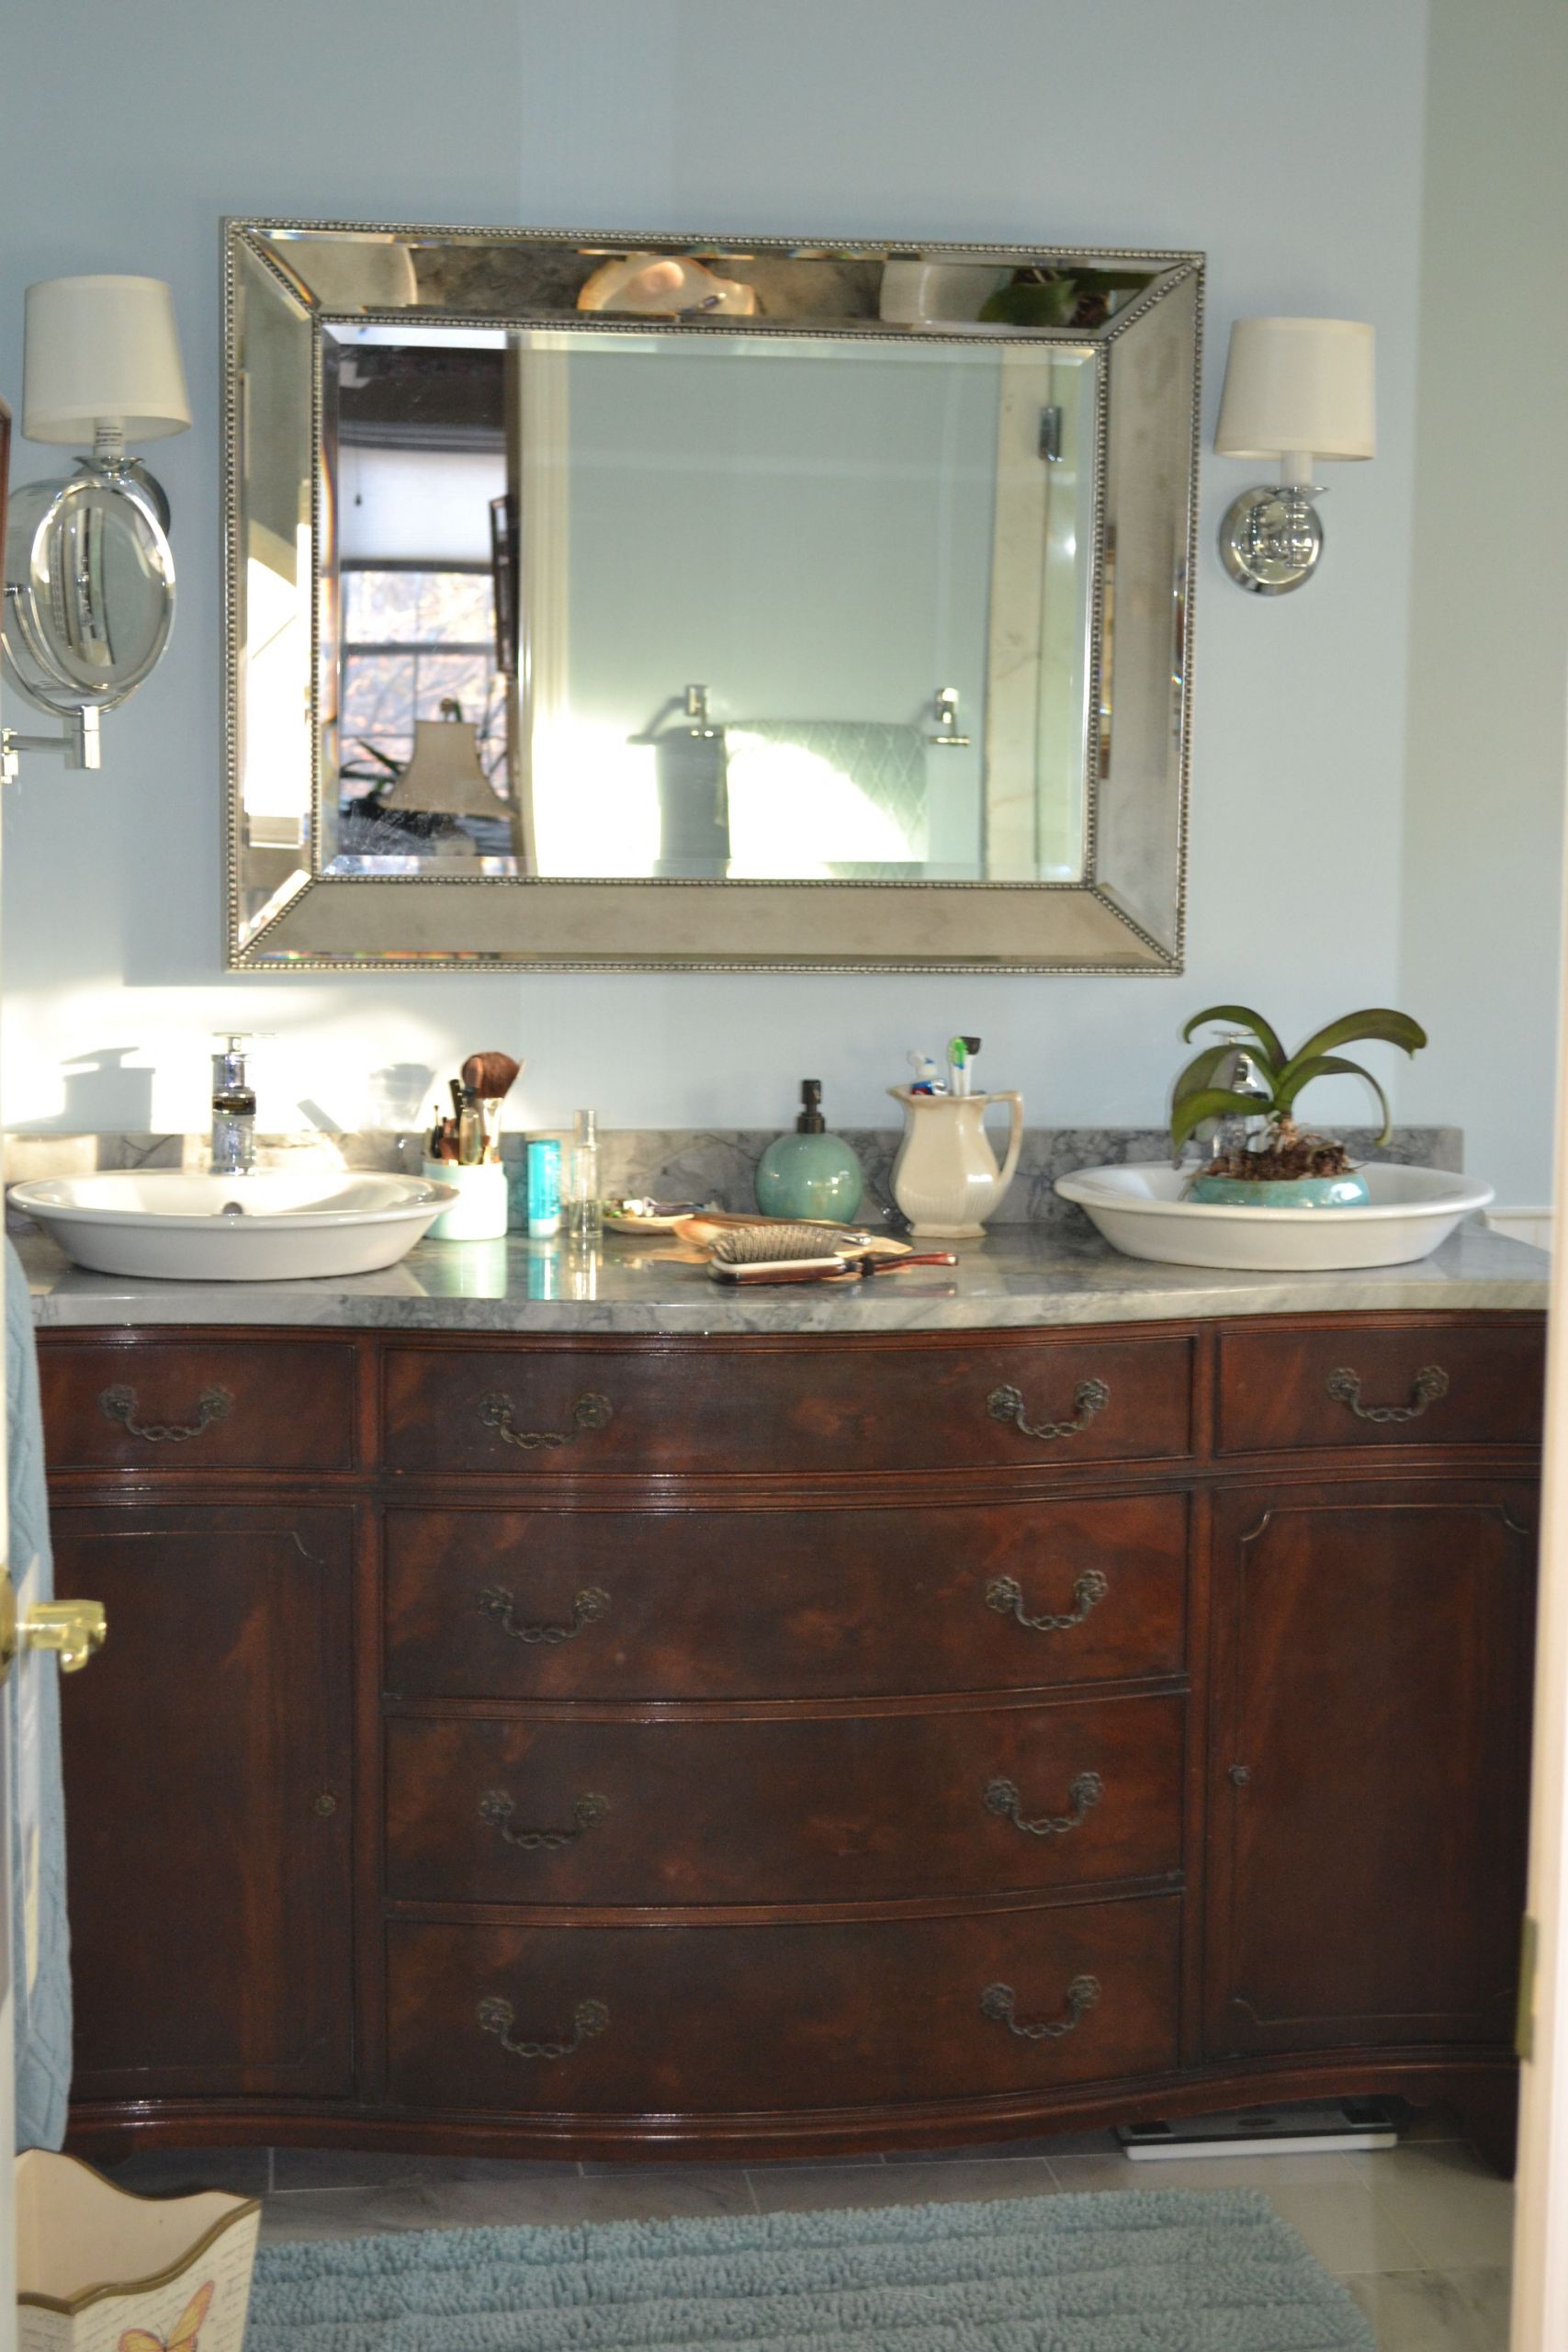 Used Bathroom Vanity
 Found this old buffet on Craigslist turned it into our